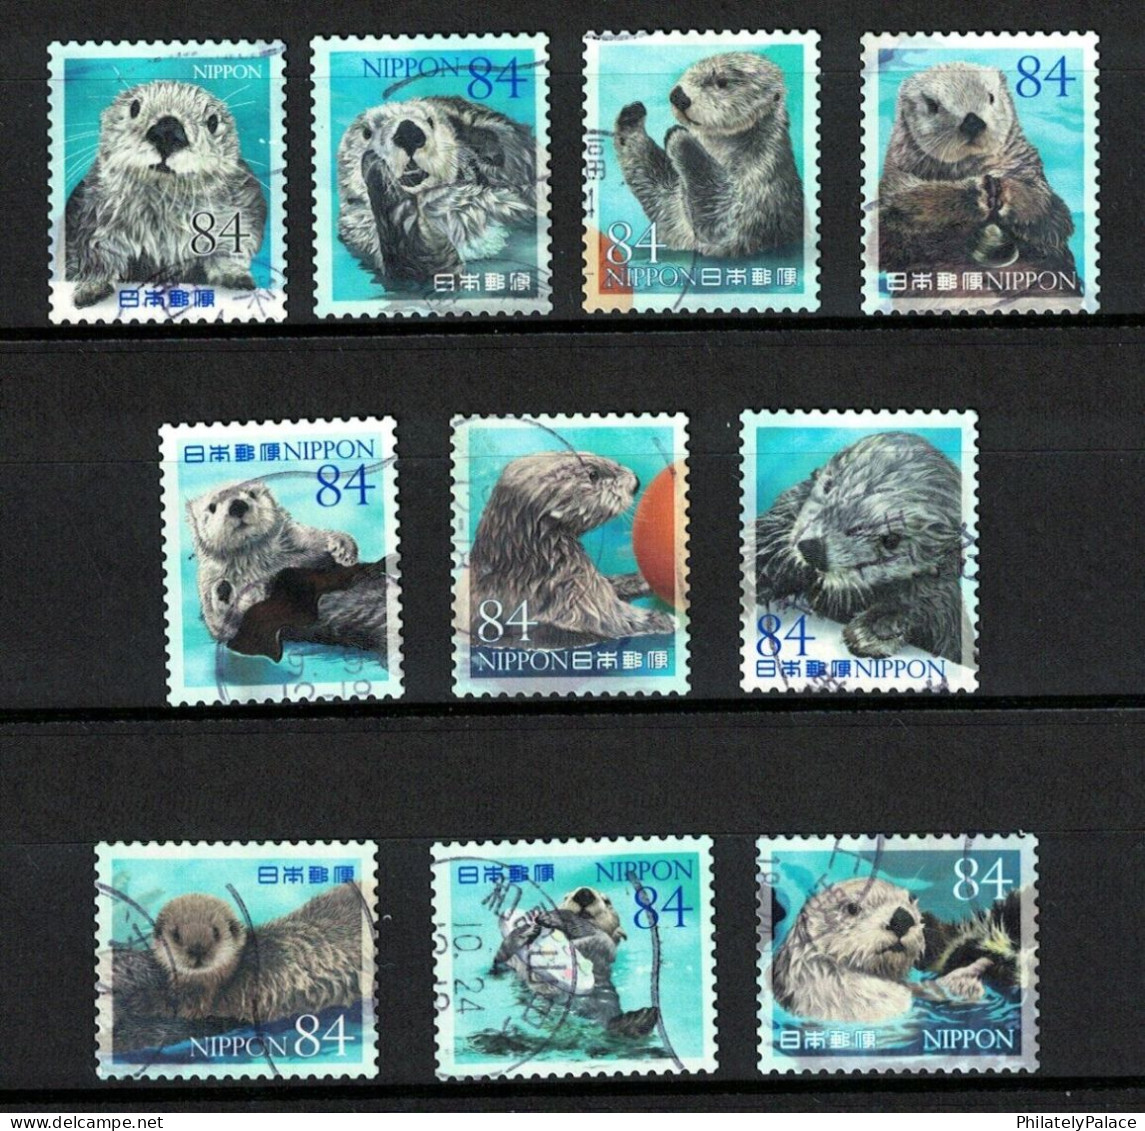 JAPAN 2022 MARINE ANIMAL LIFE PART 6 OTTER COMP. SET OF 10 STAMP IN FINE USED CONDITION (**) - Used Stamps